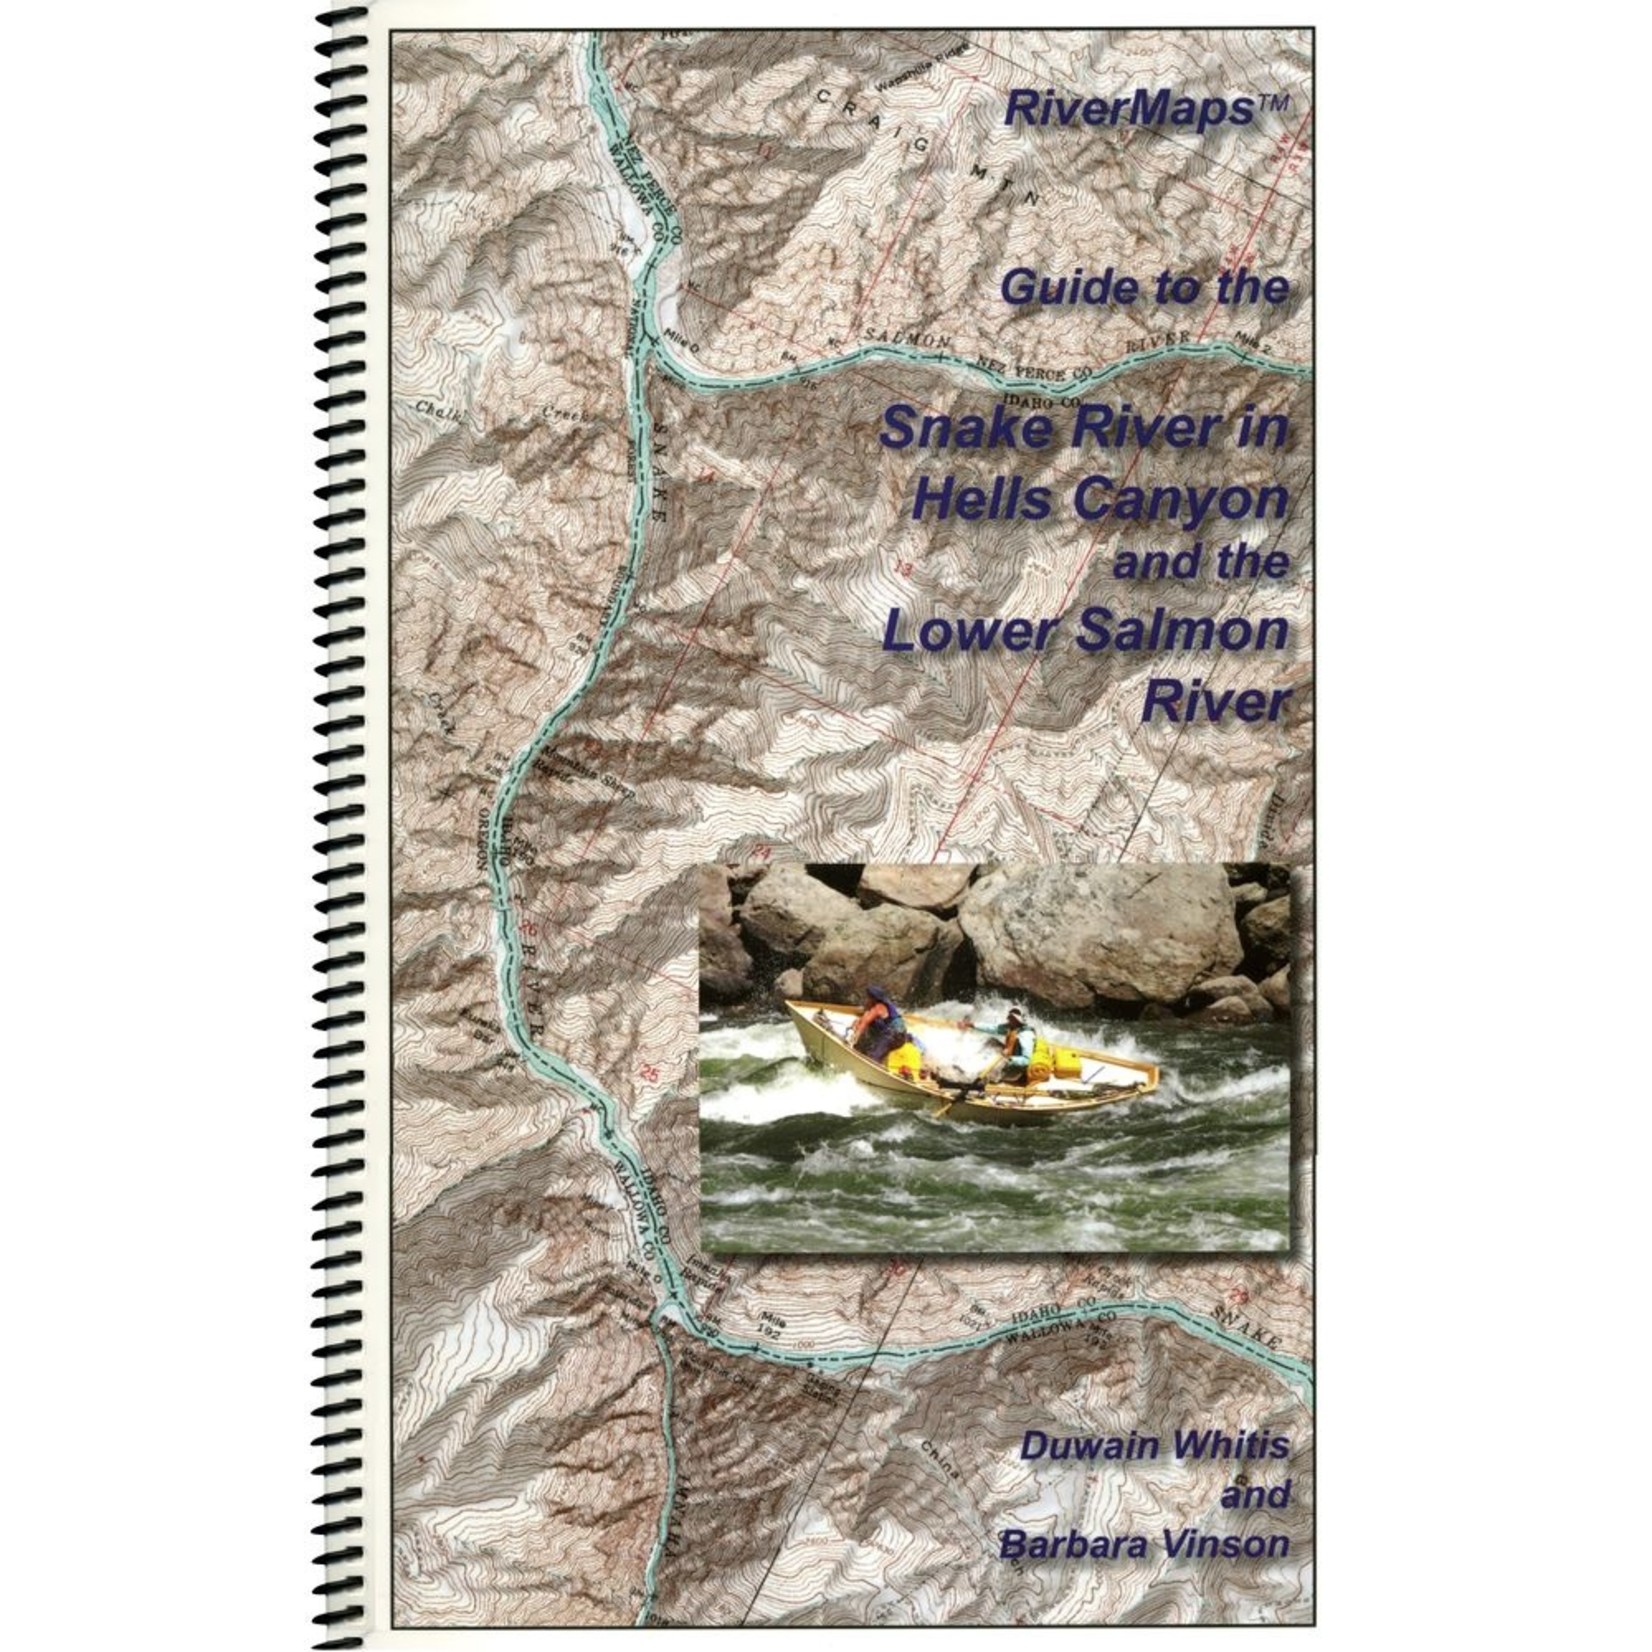 Rivermaps RiverMaps Guide to the Snake River in Hells Canyon and the Lower Salmon River